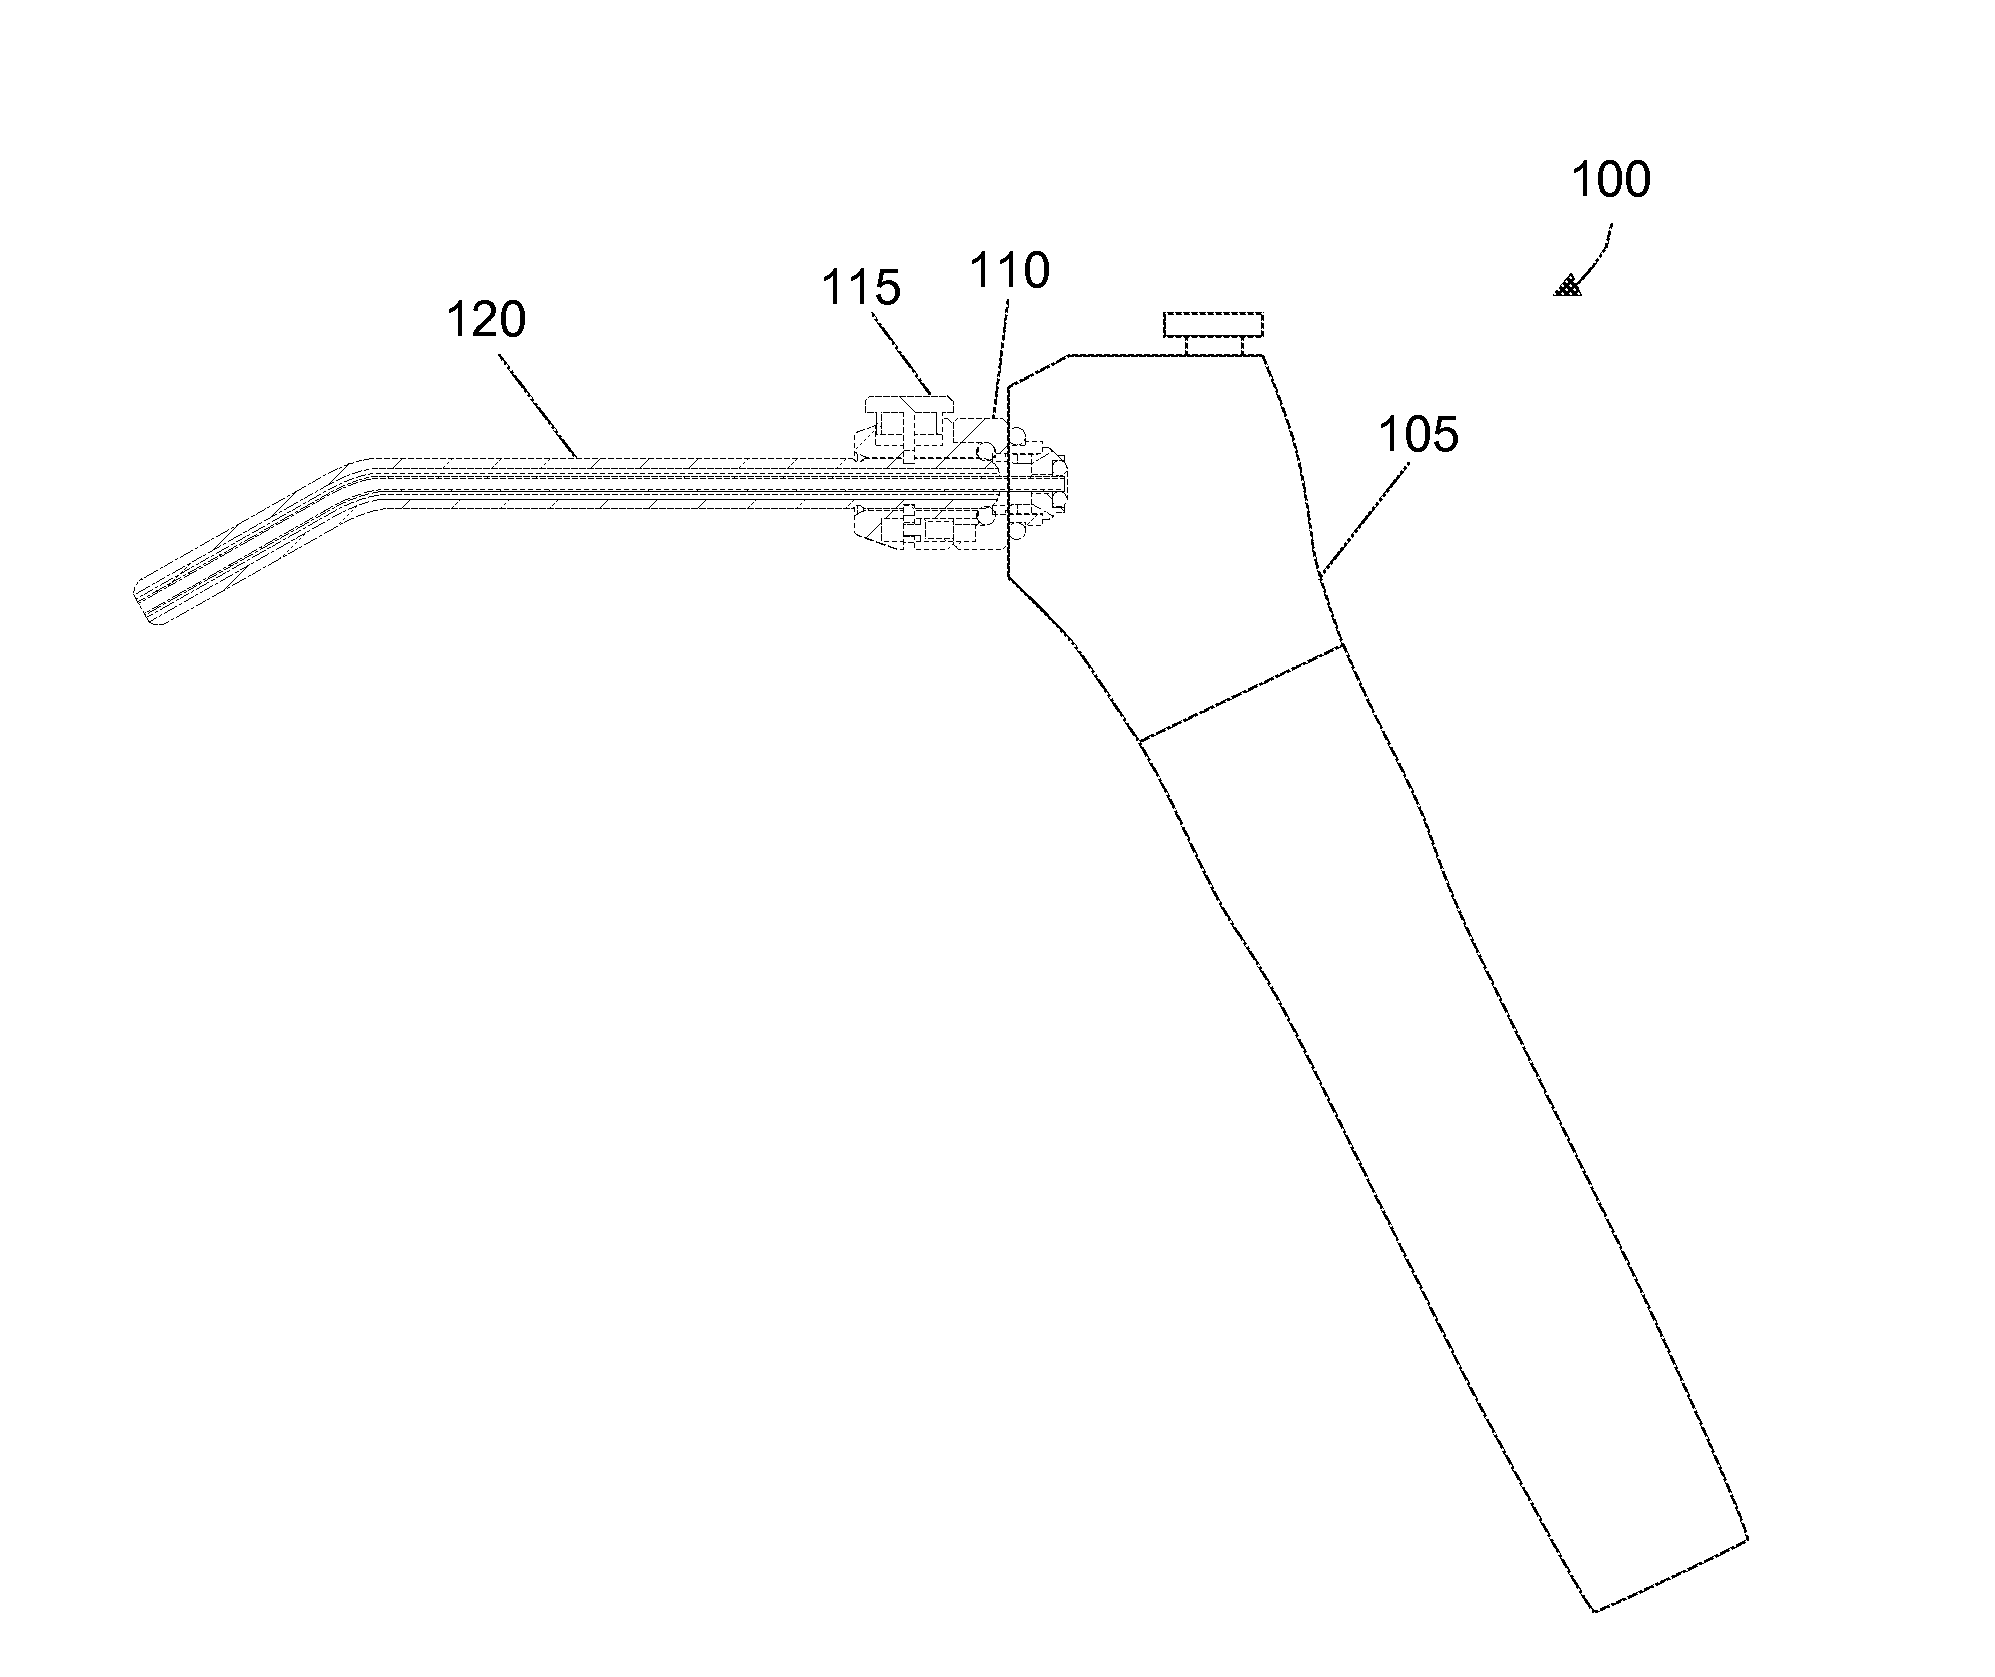 Adapter and tip for an air and water dental syringe device